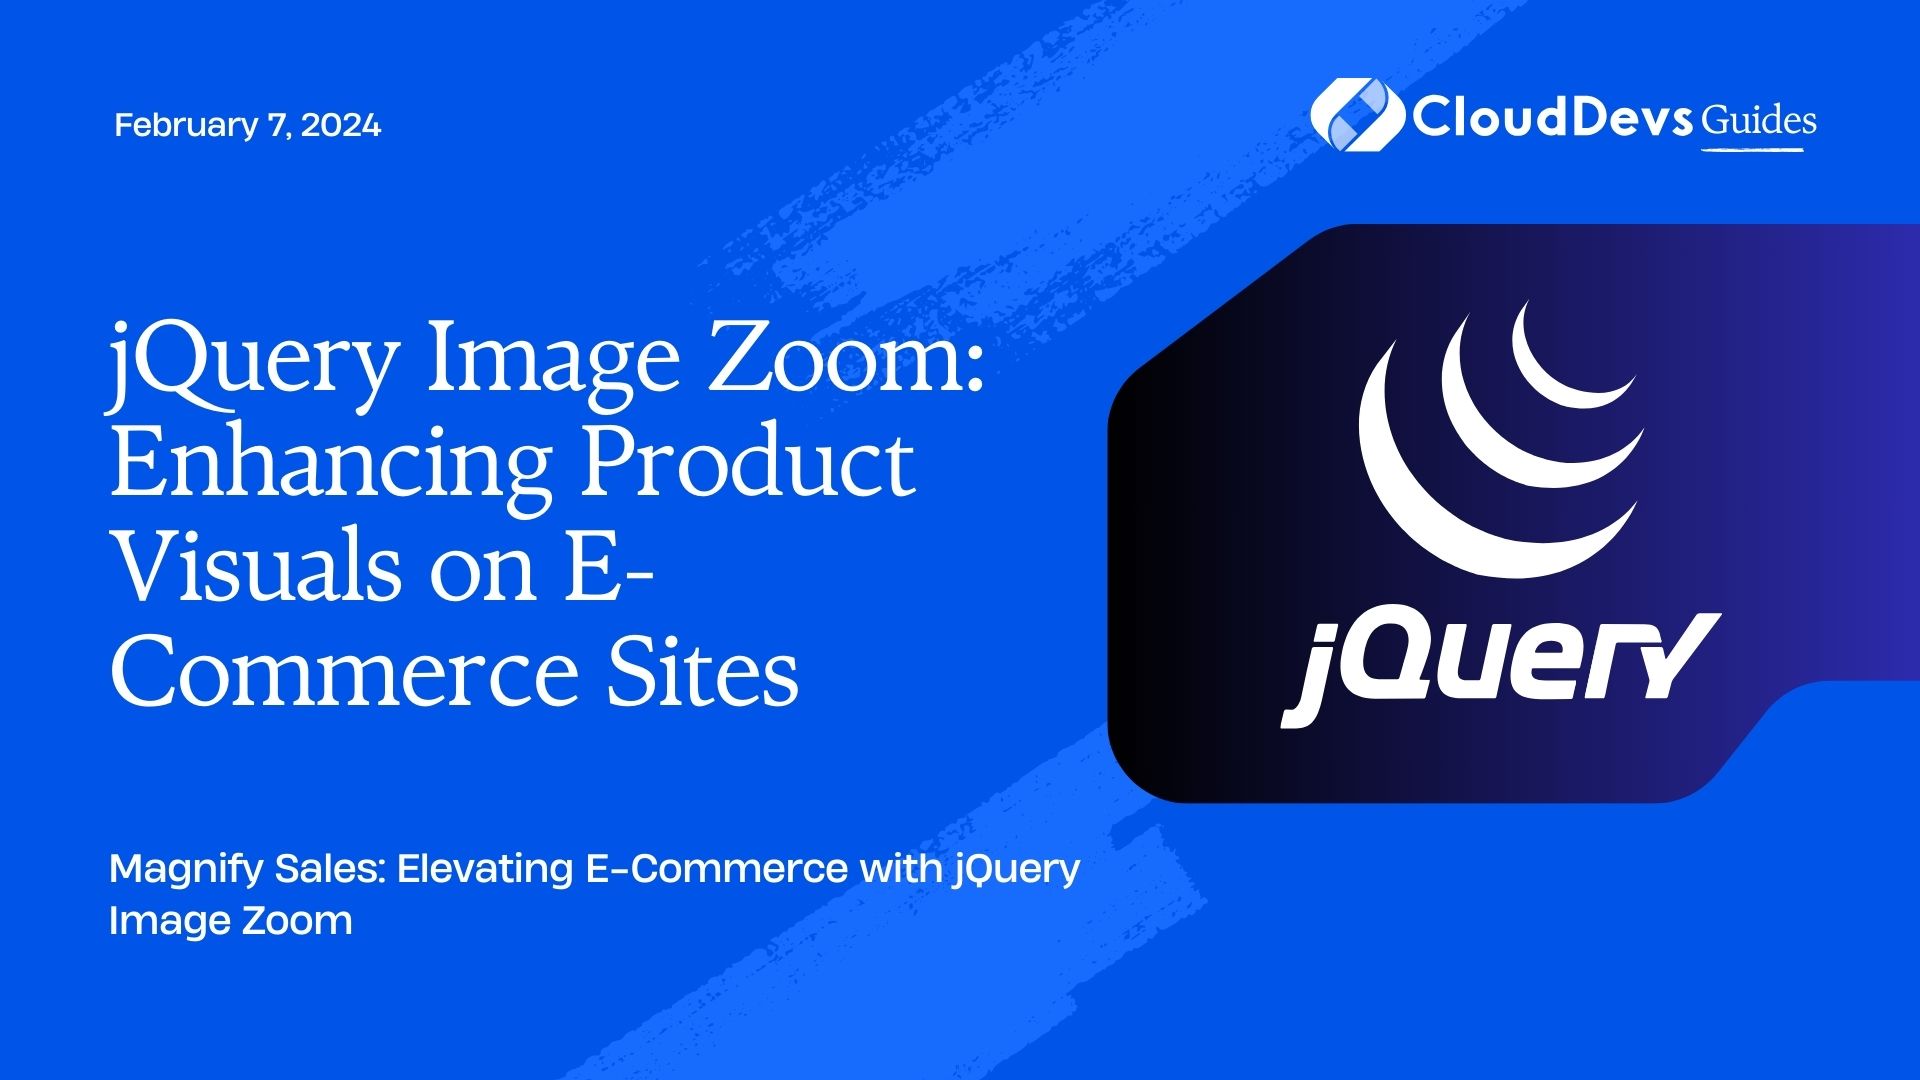 jQuery Image Zoom: Enhancing Product Visuals on E-Commerce Sites